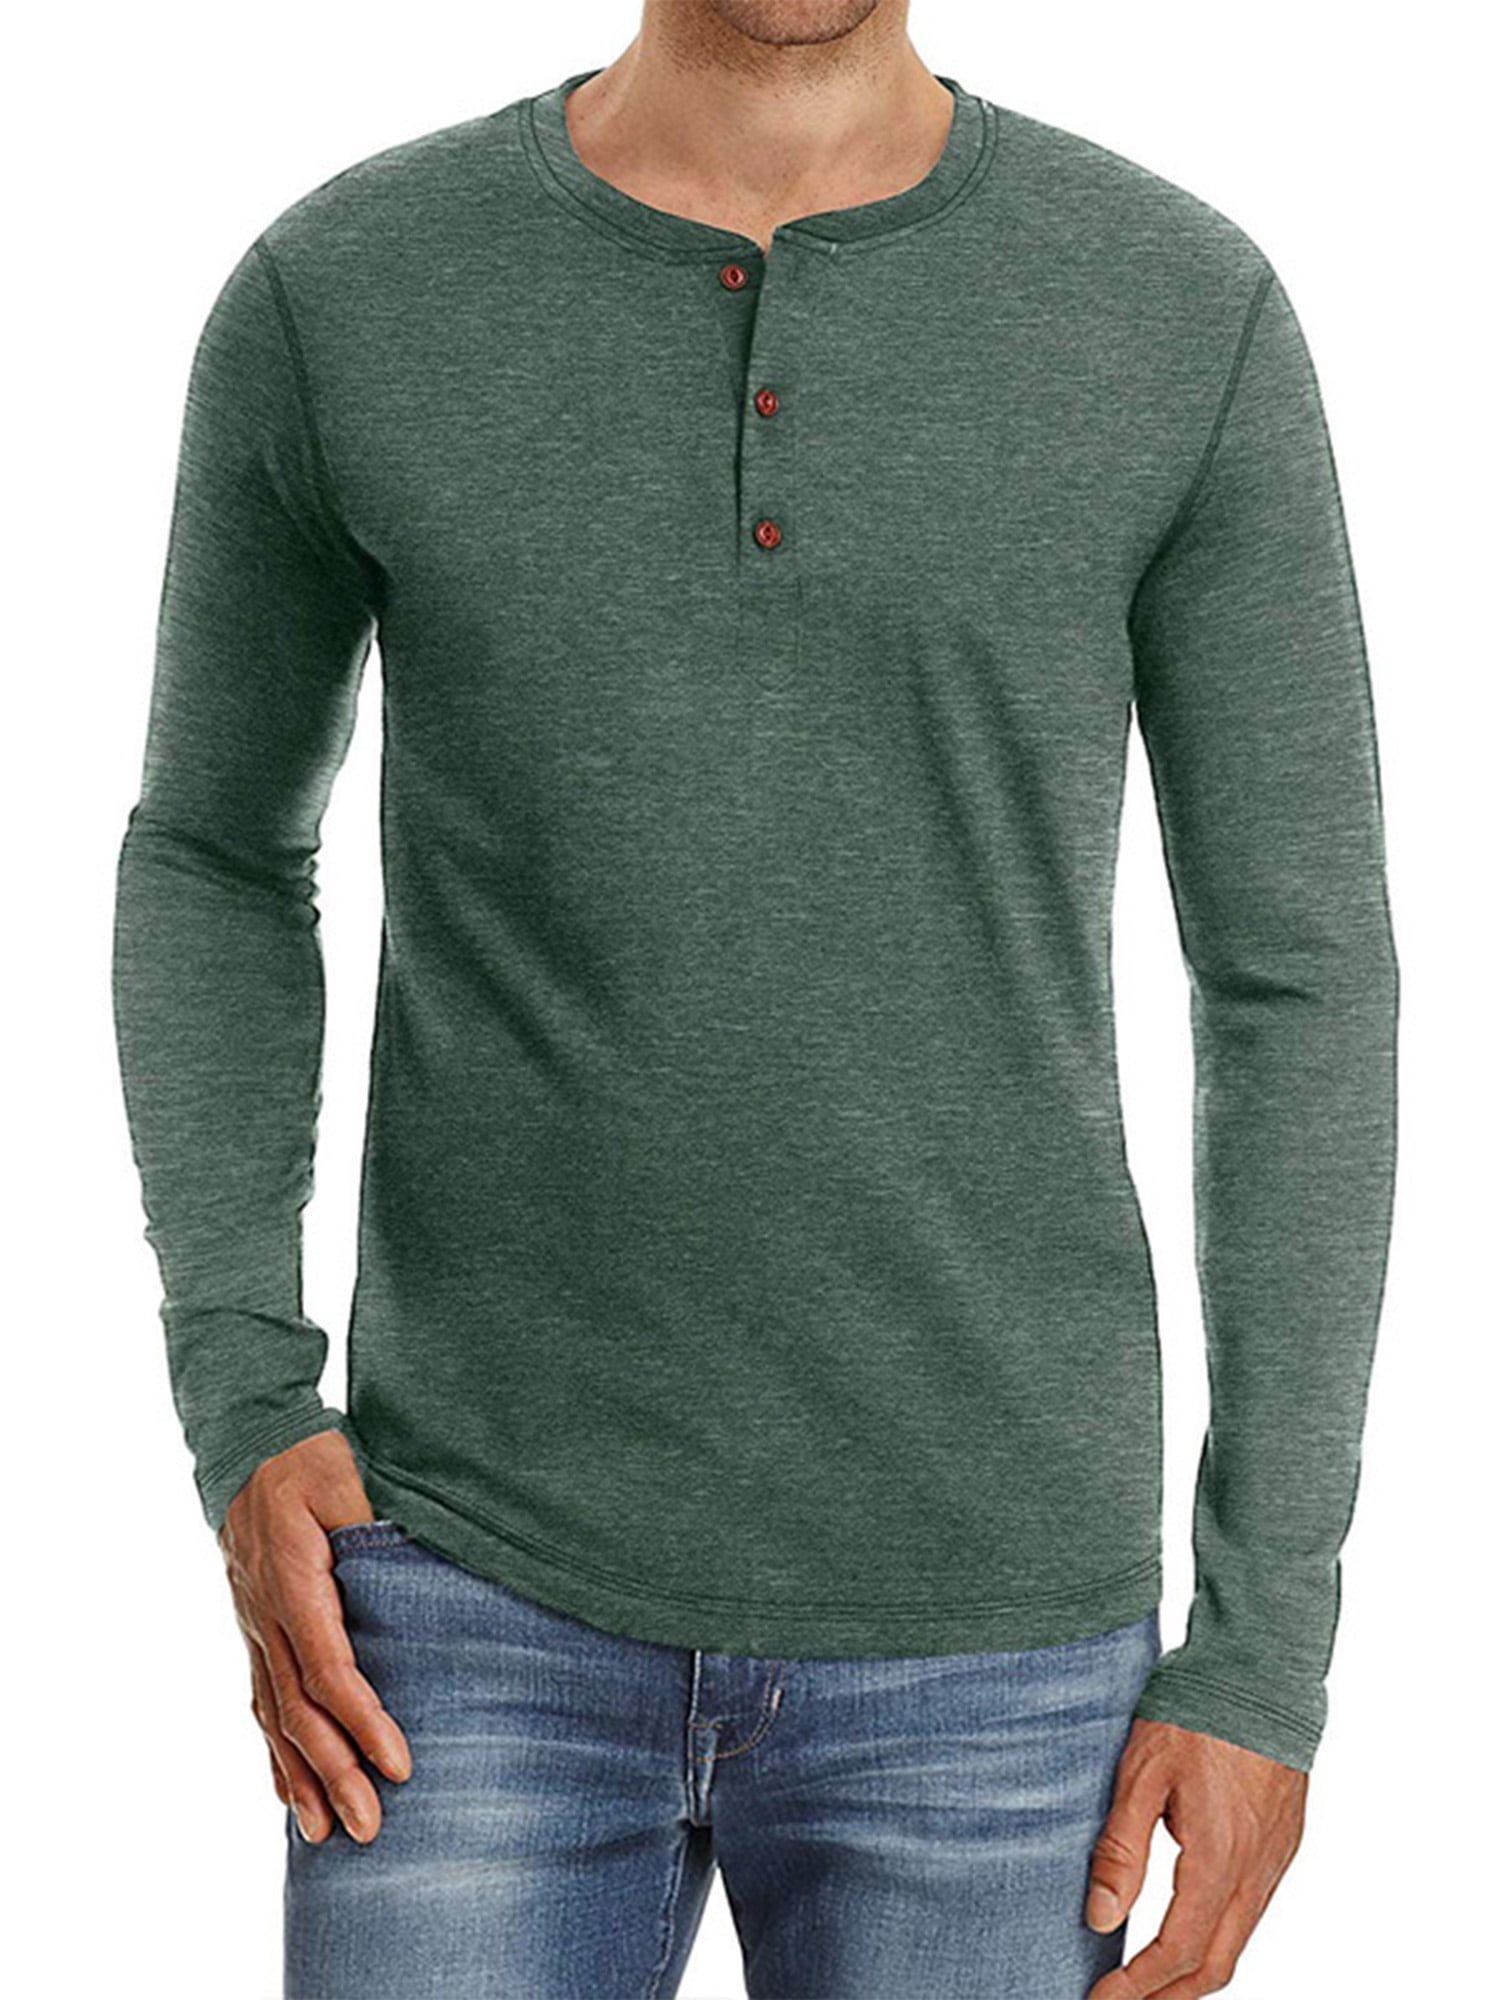 Mens Long-Sleeved T-Shirts,O-Neck Patchwork Button Henley Jersey T Shirt Casual Loose Beach Top Coffee 